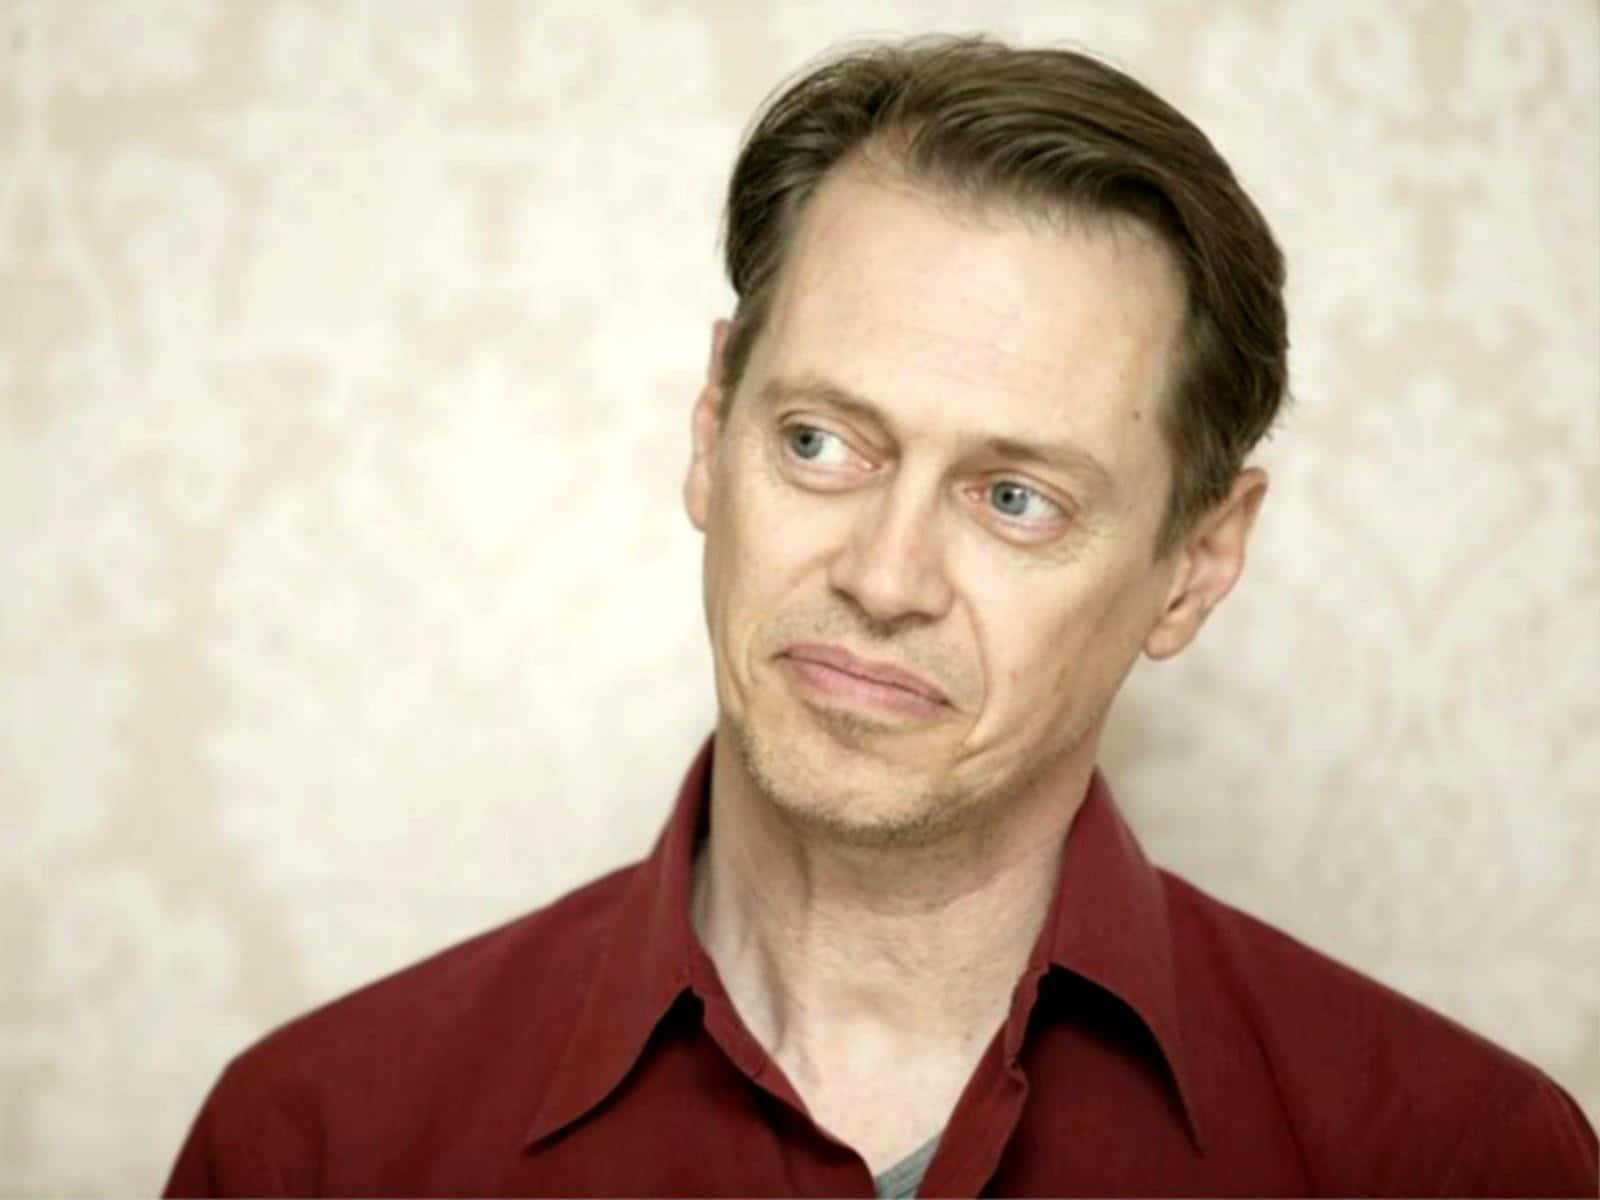 Veteran Hollywood star Steve Buscemi in a thoughtful pose. Wallpaper